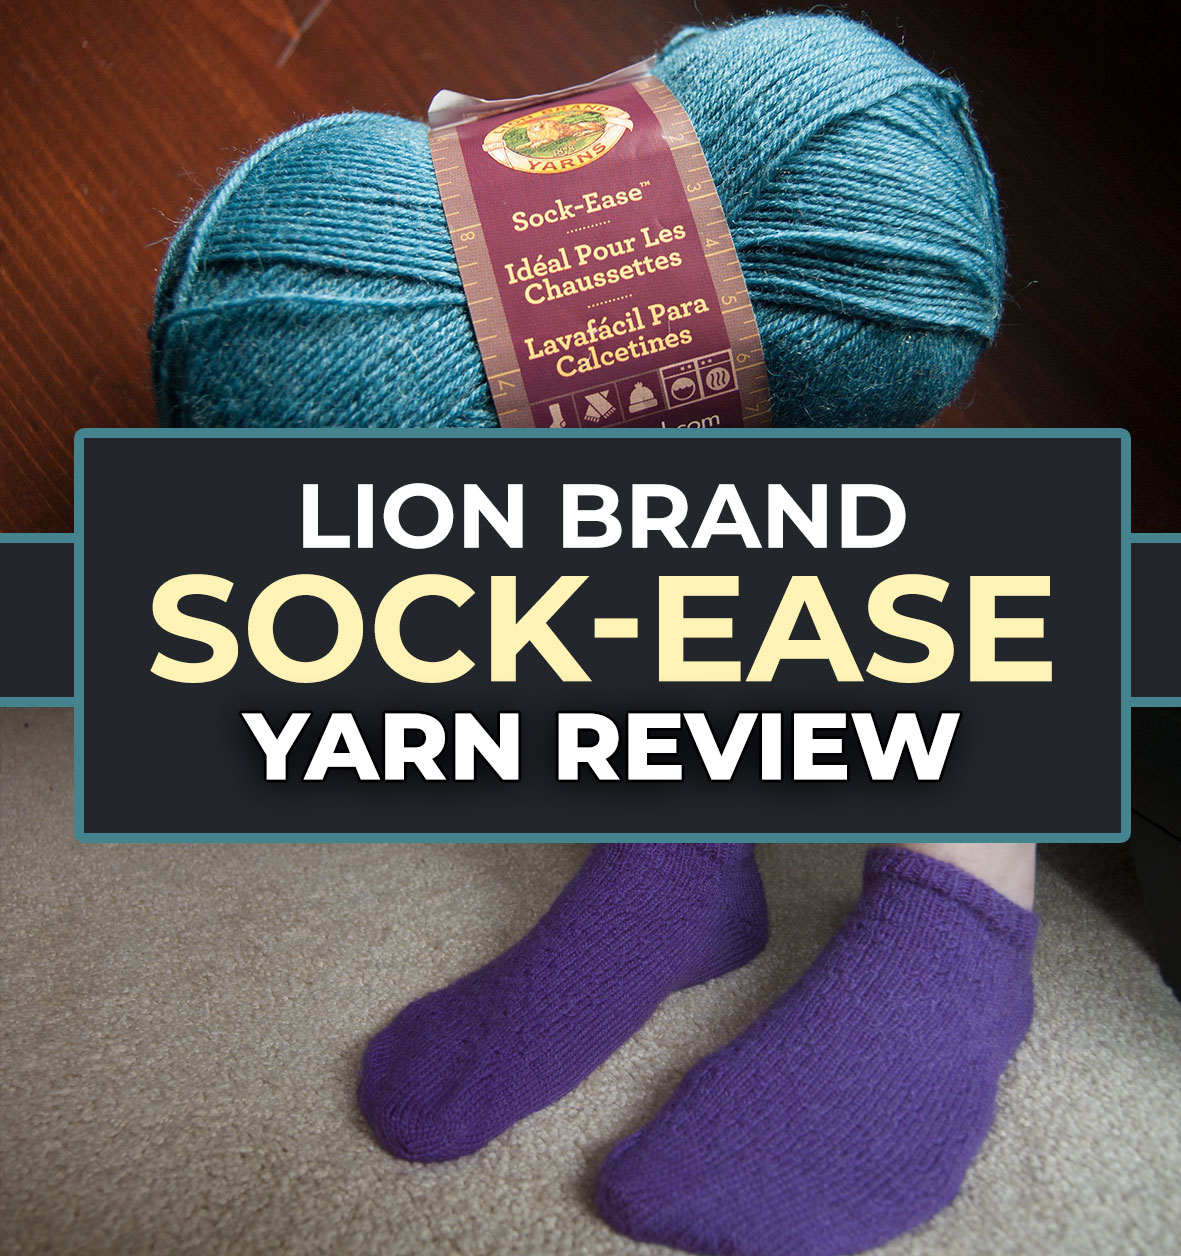 Lion Brand Sock-Ease Review - Budget Yarn Reviews